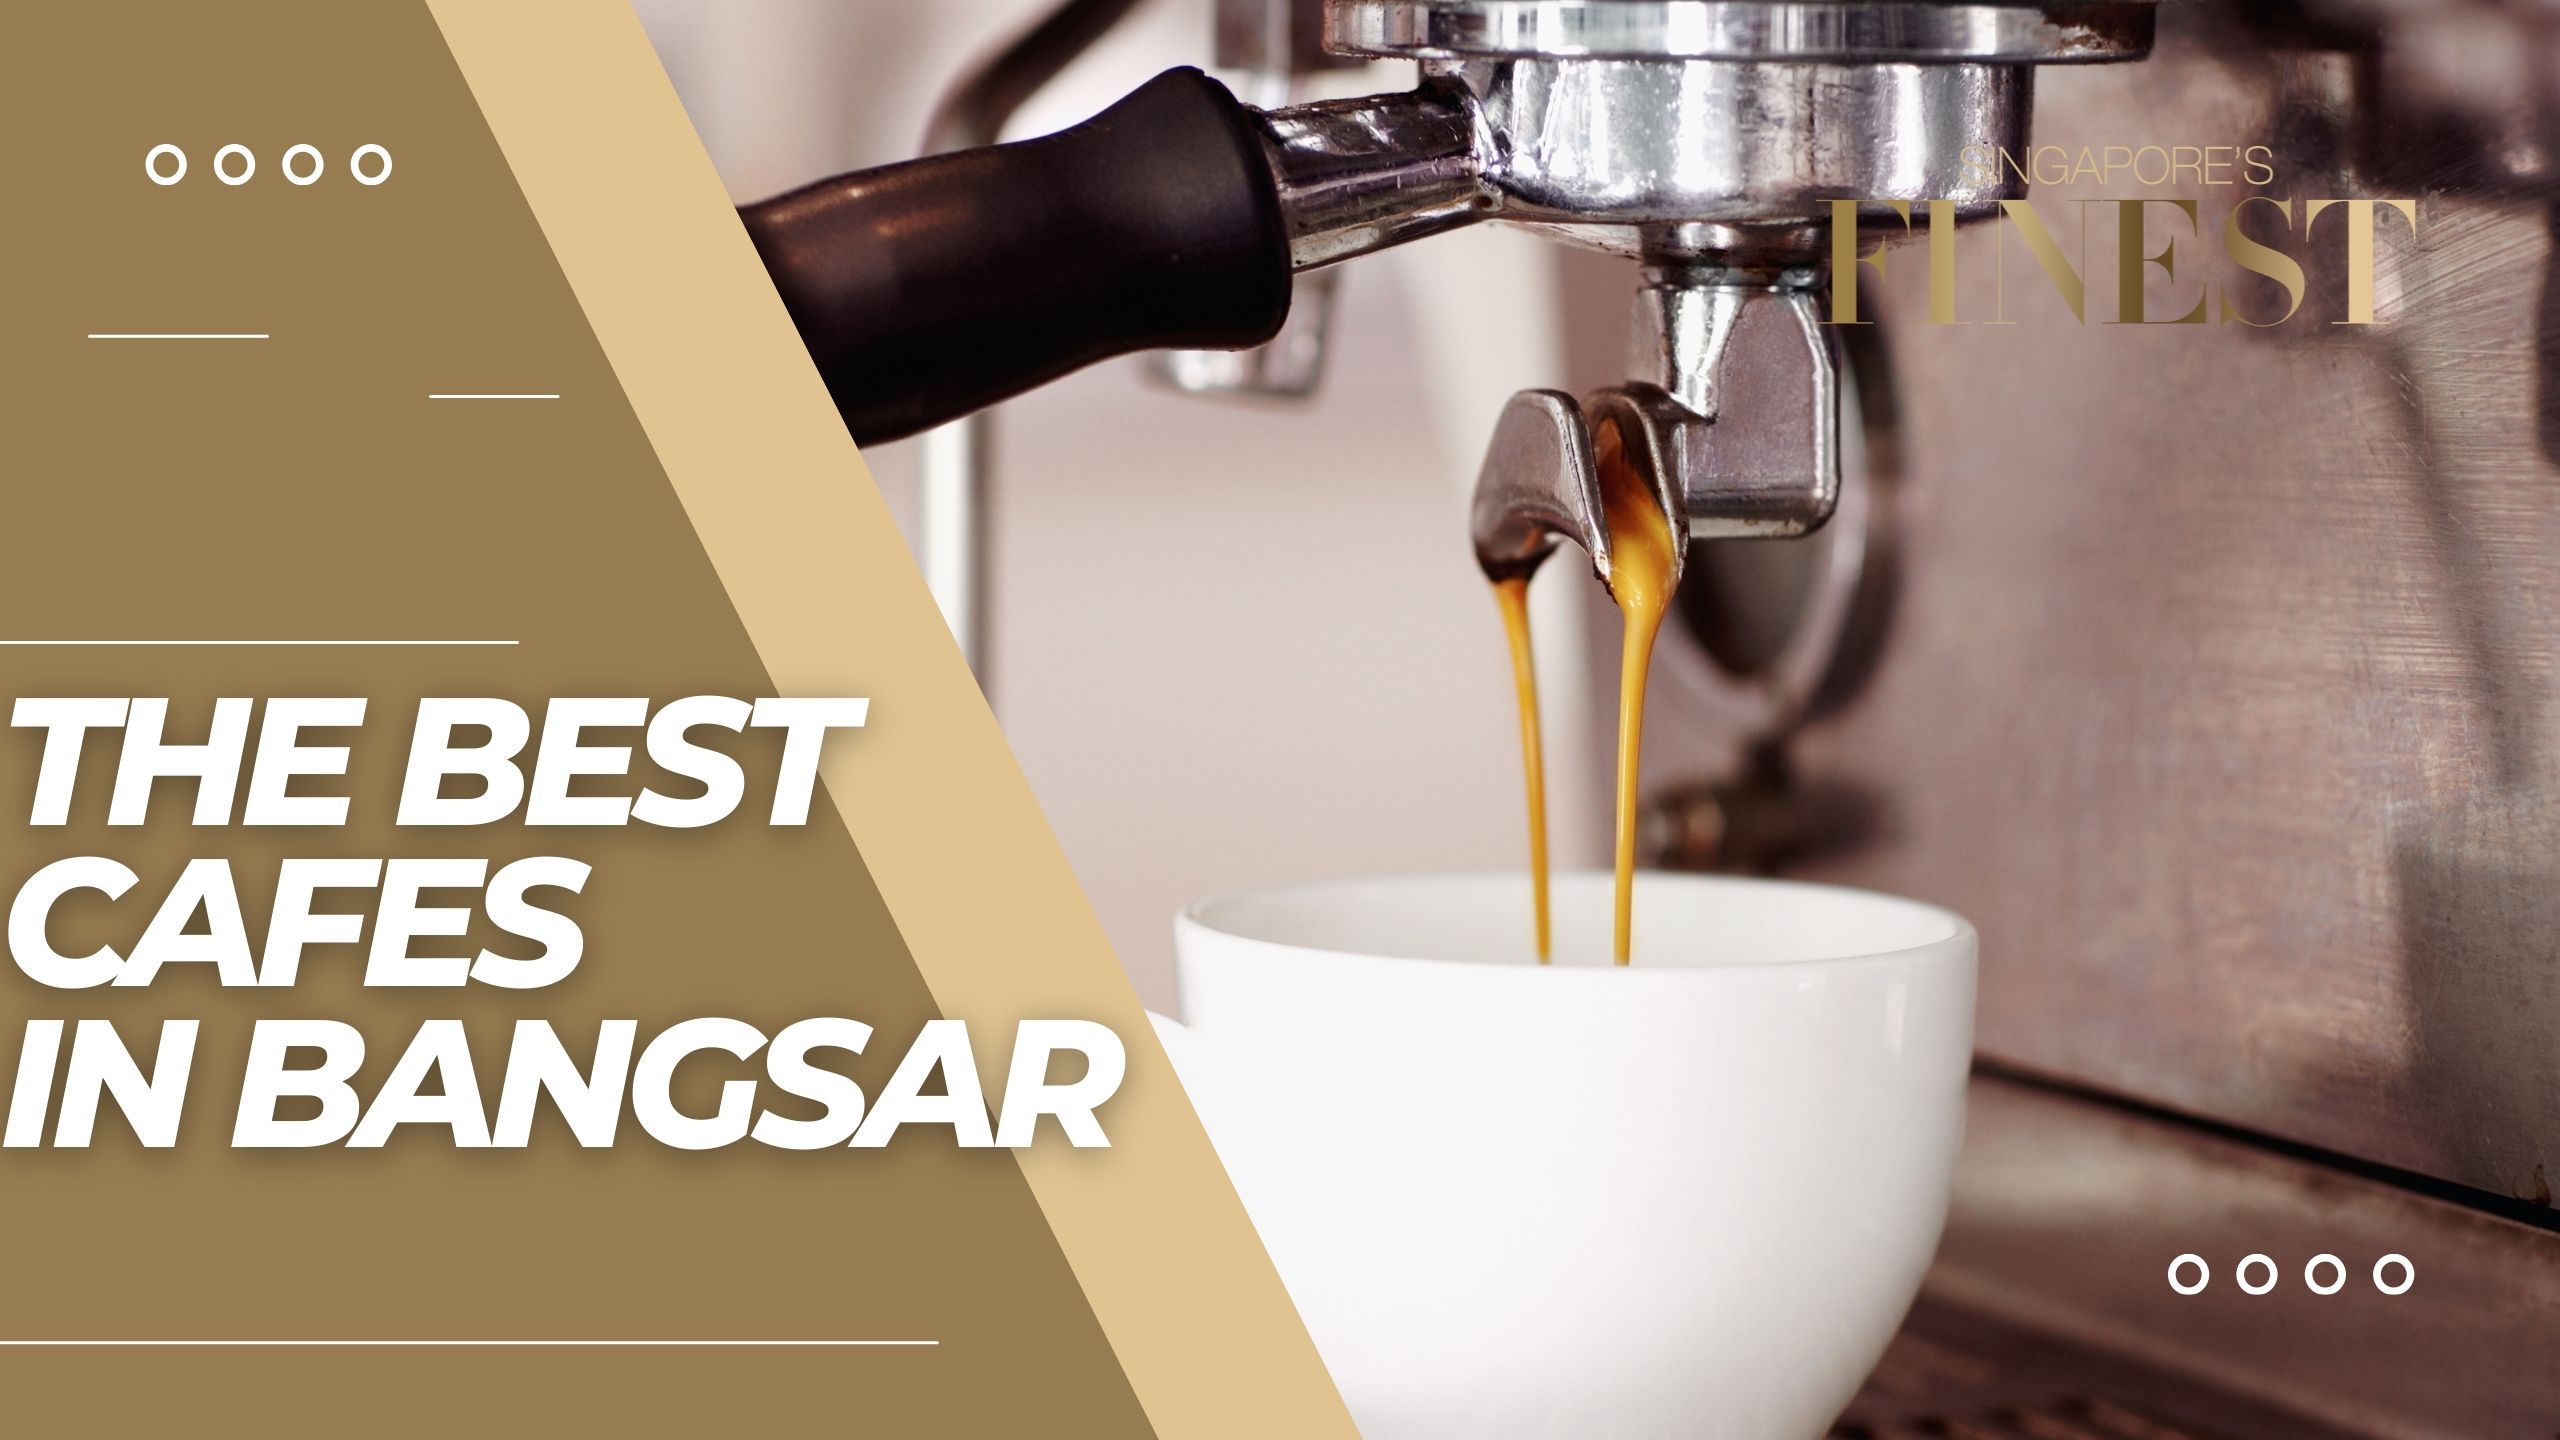 The Finest Cafes in Bangsar